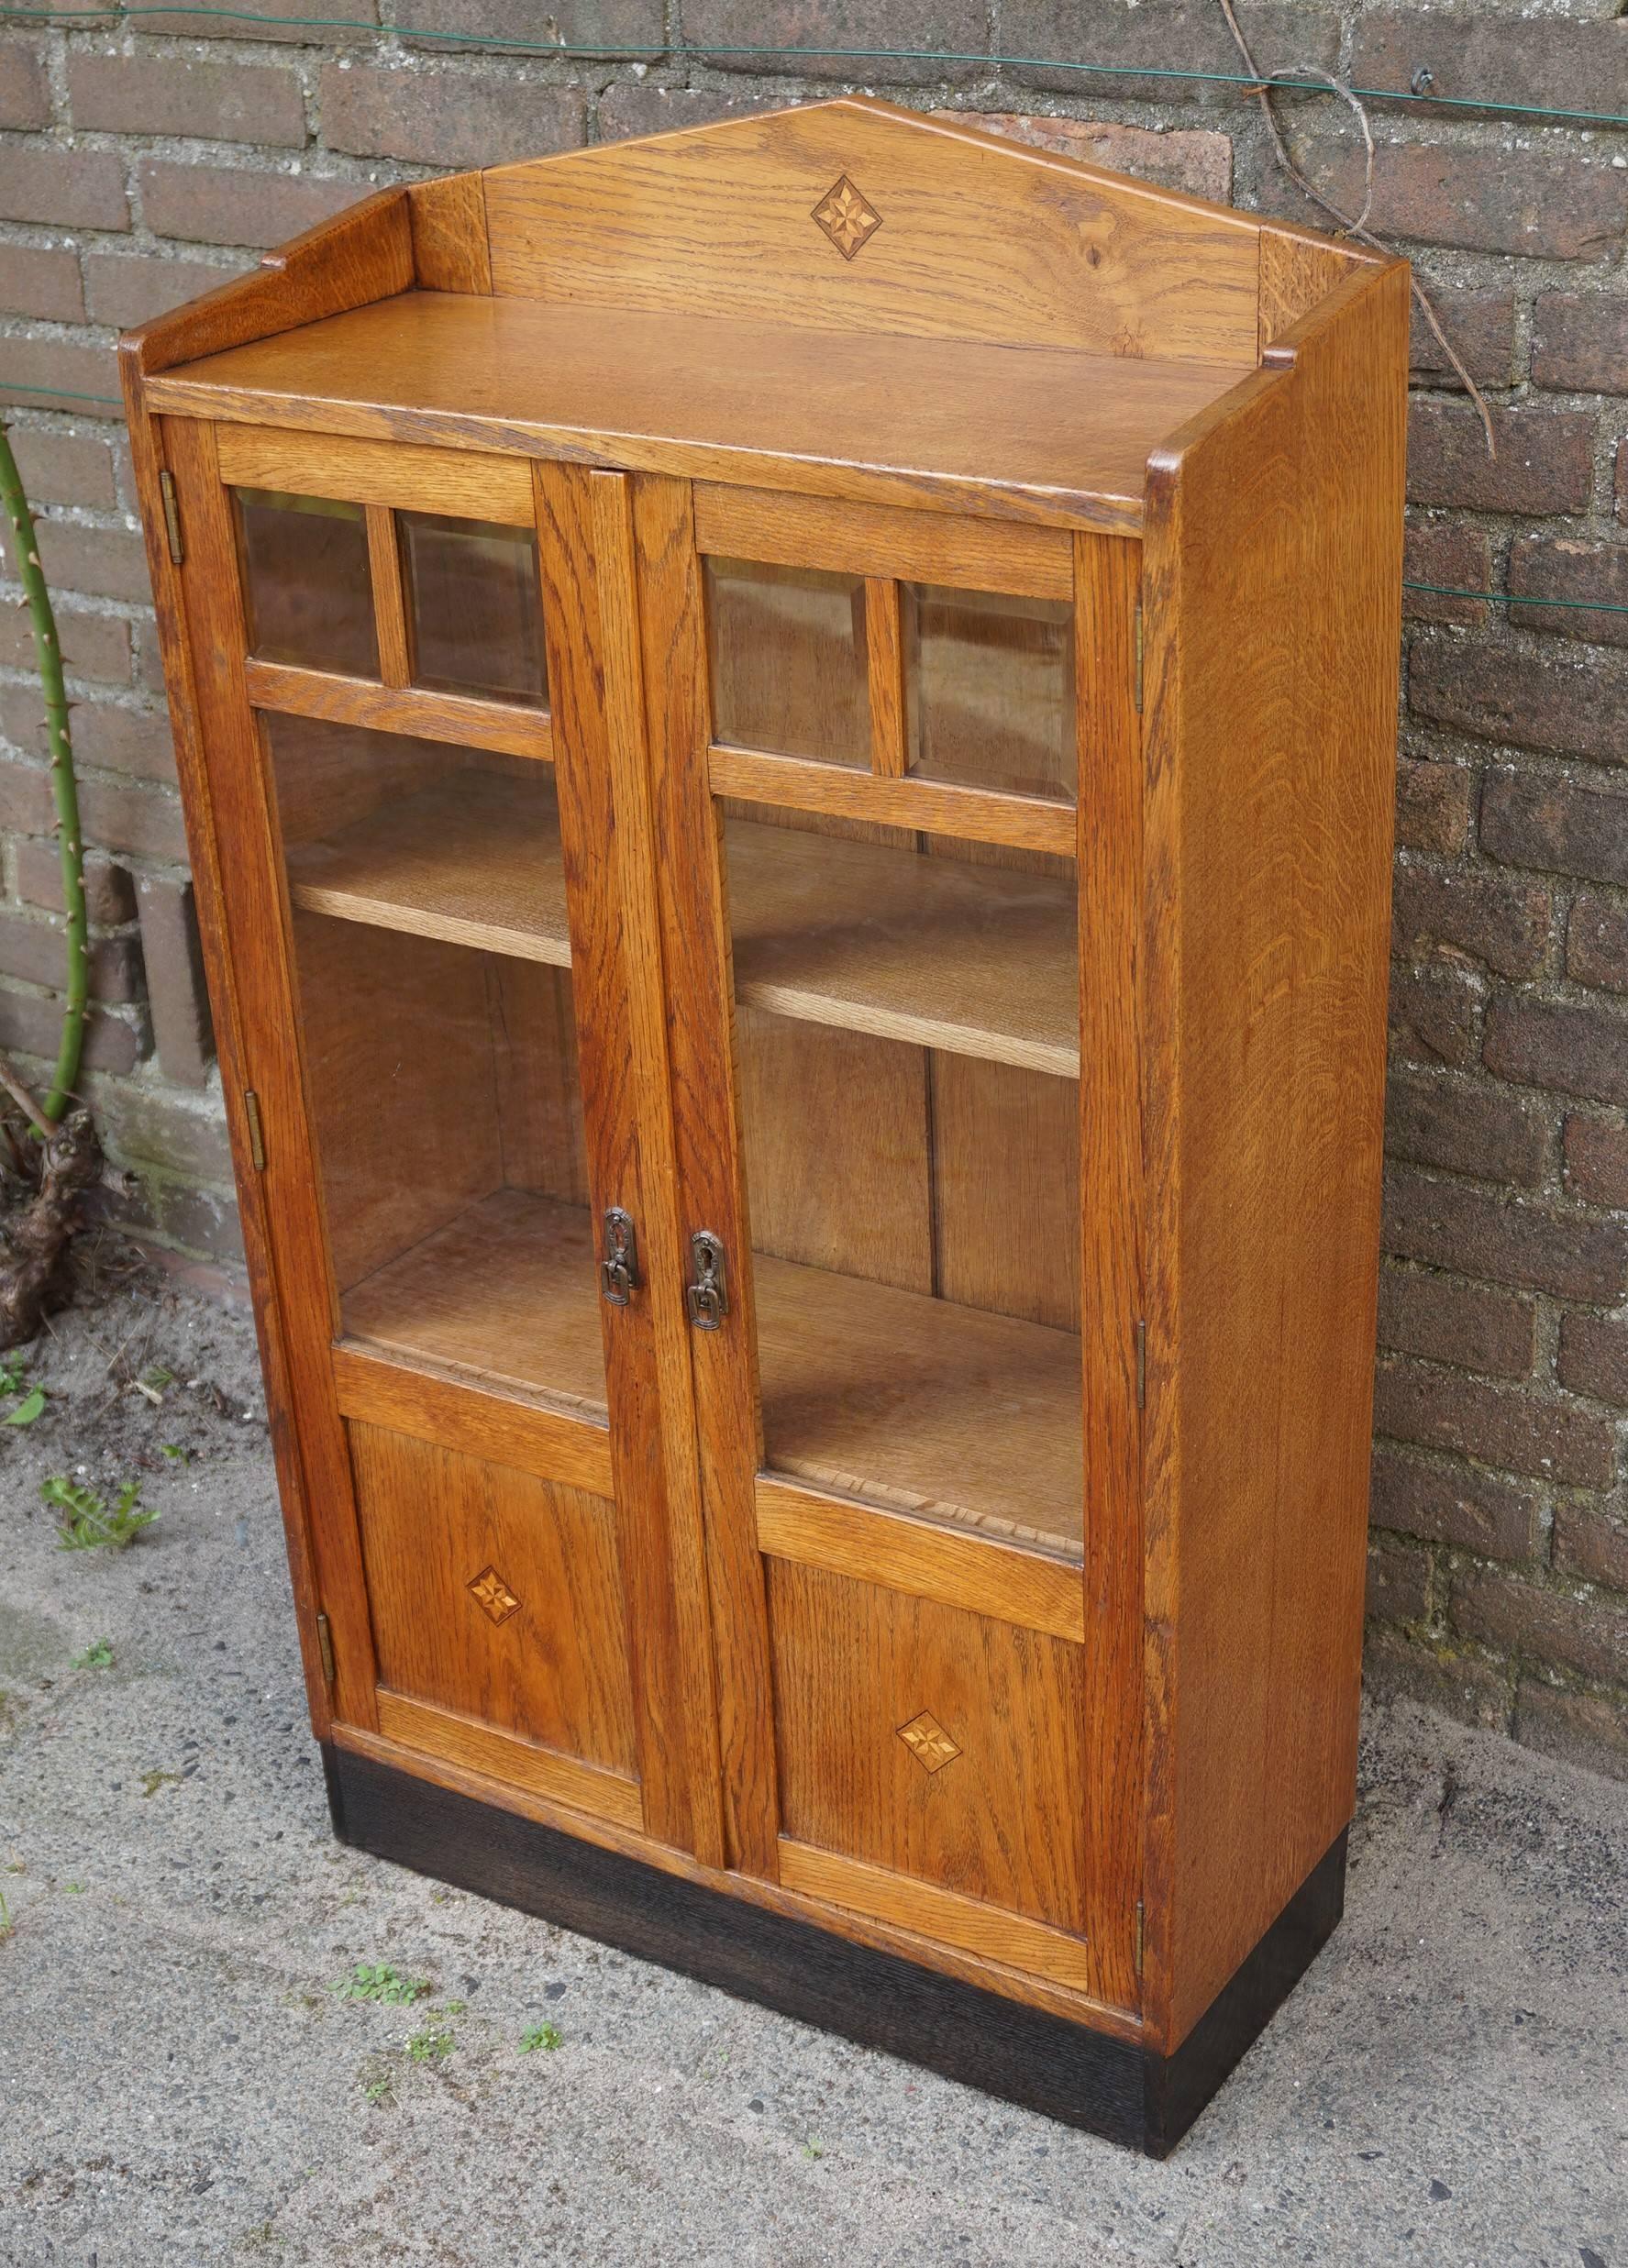 Early 20th century, small & highly practical bookcase.

This stunning little Arts and Crafts bookcase showcases the quality of the early 1900's workmanship and the excellent condition is like an ode to its maker. Former owners have clearly taken